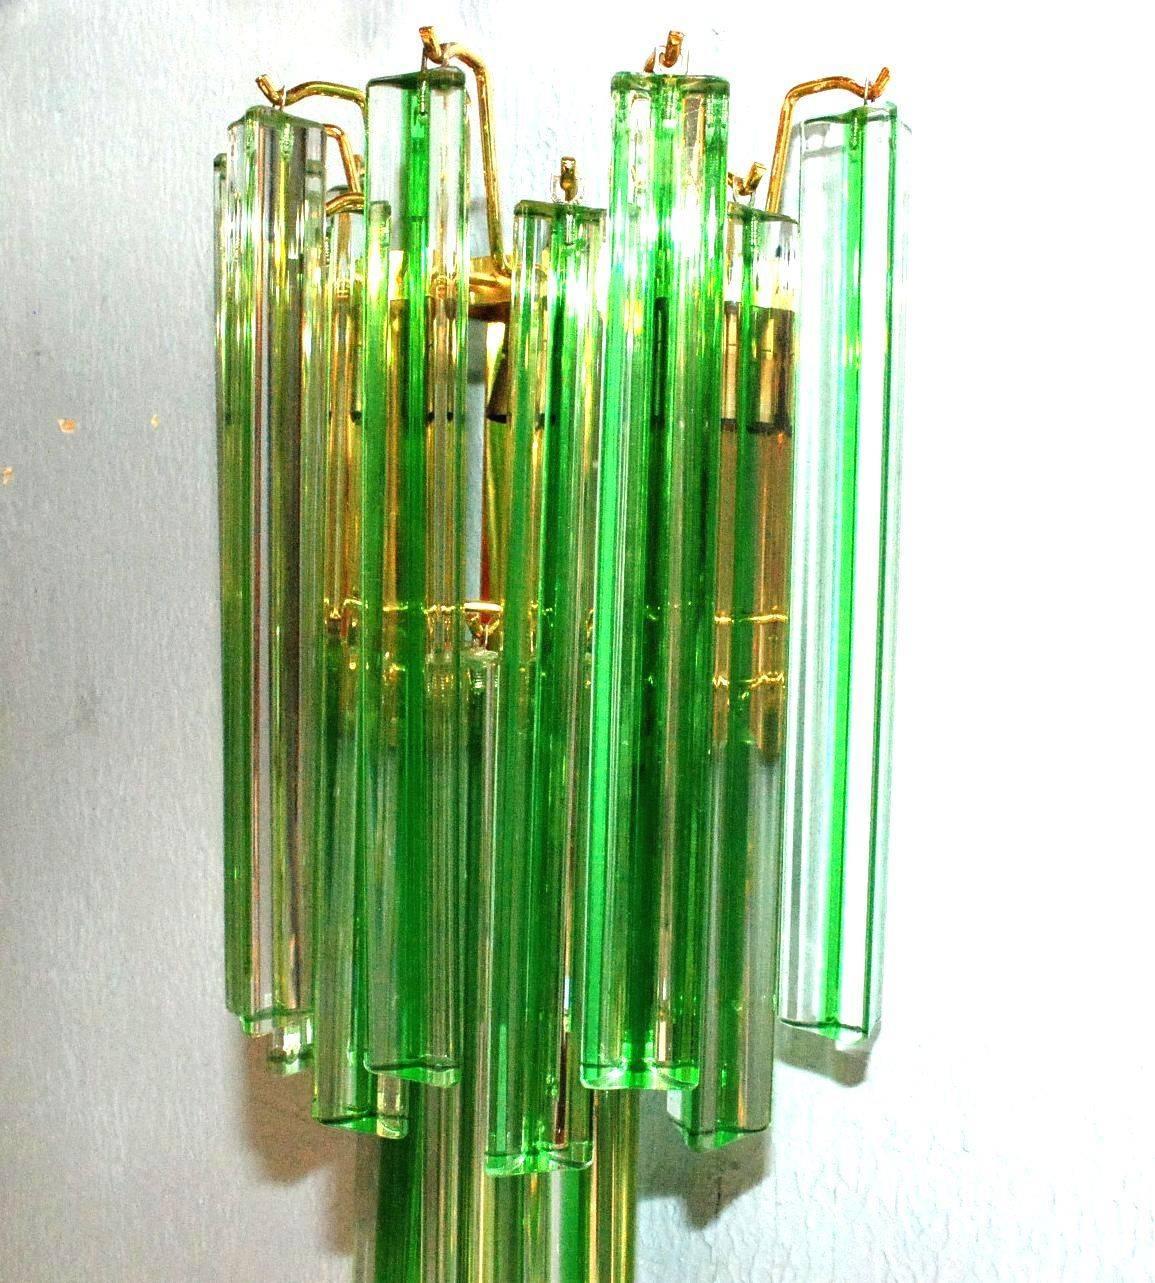 Set of six Italian sconces with Murano glass triedri crystals with green stripes on brass frame.
Two candelabra light sockets each sconce, wired for the U.S.
Can be purchased individually, price listed is for one sconce.